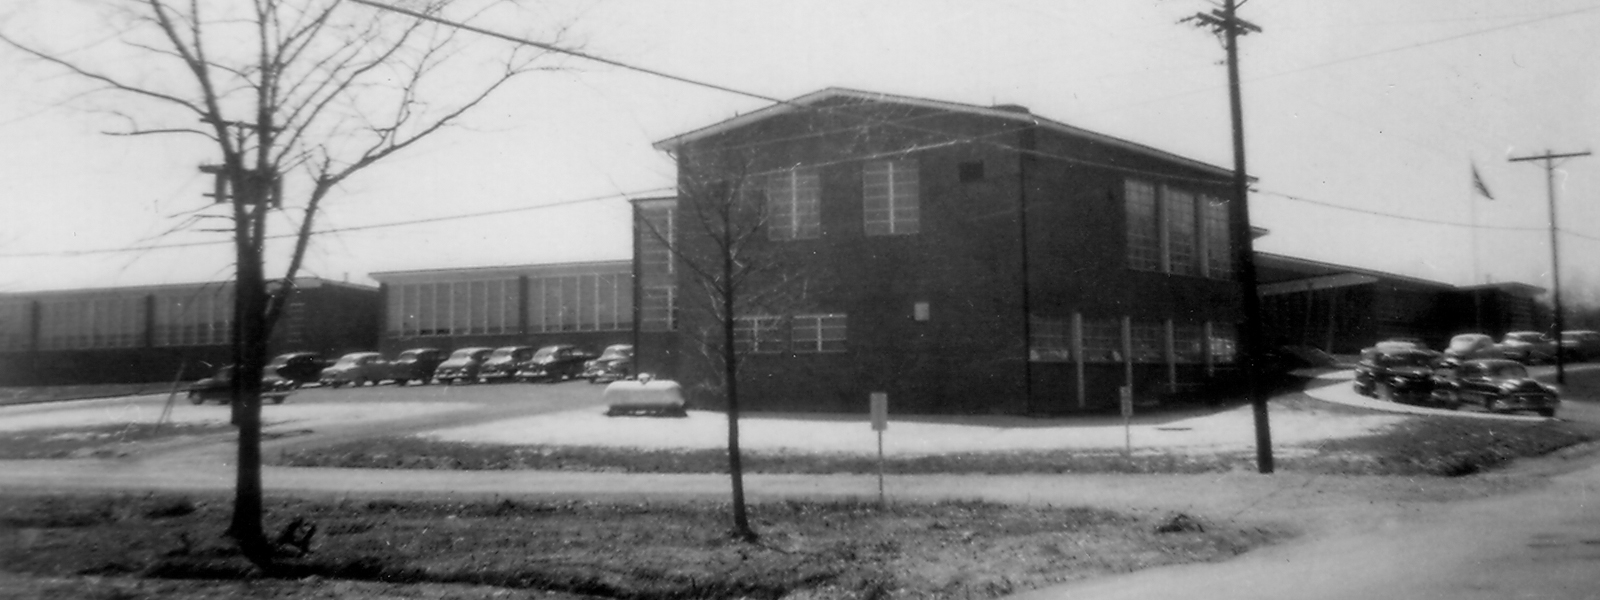 Black and white photograph of Garfield Elementary School taken in 1954 for a fire insurance survey for the Fairfax County School Board. The picture was taken from Old Keene Mill Road and faces the east side of the building. This side of the school looks very similar today, except the main entrance has been moved to face Spring Road. 